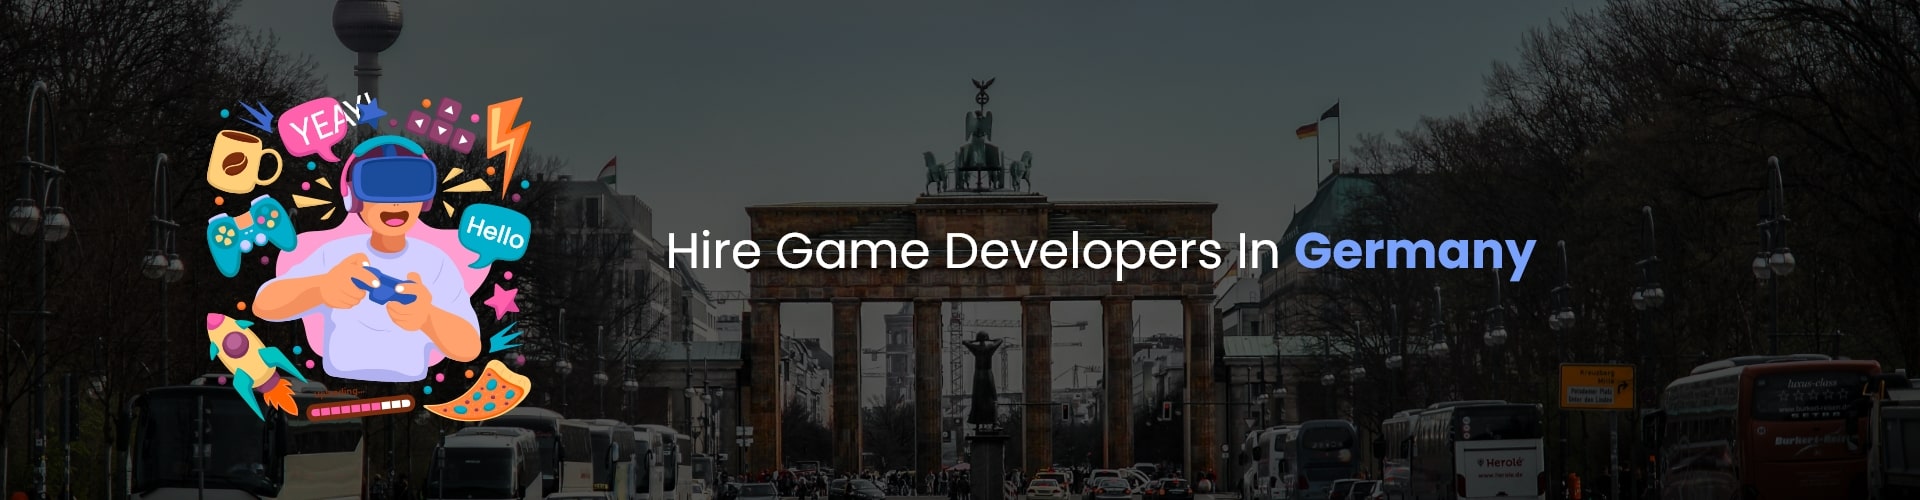 hire game developers in germany